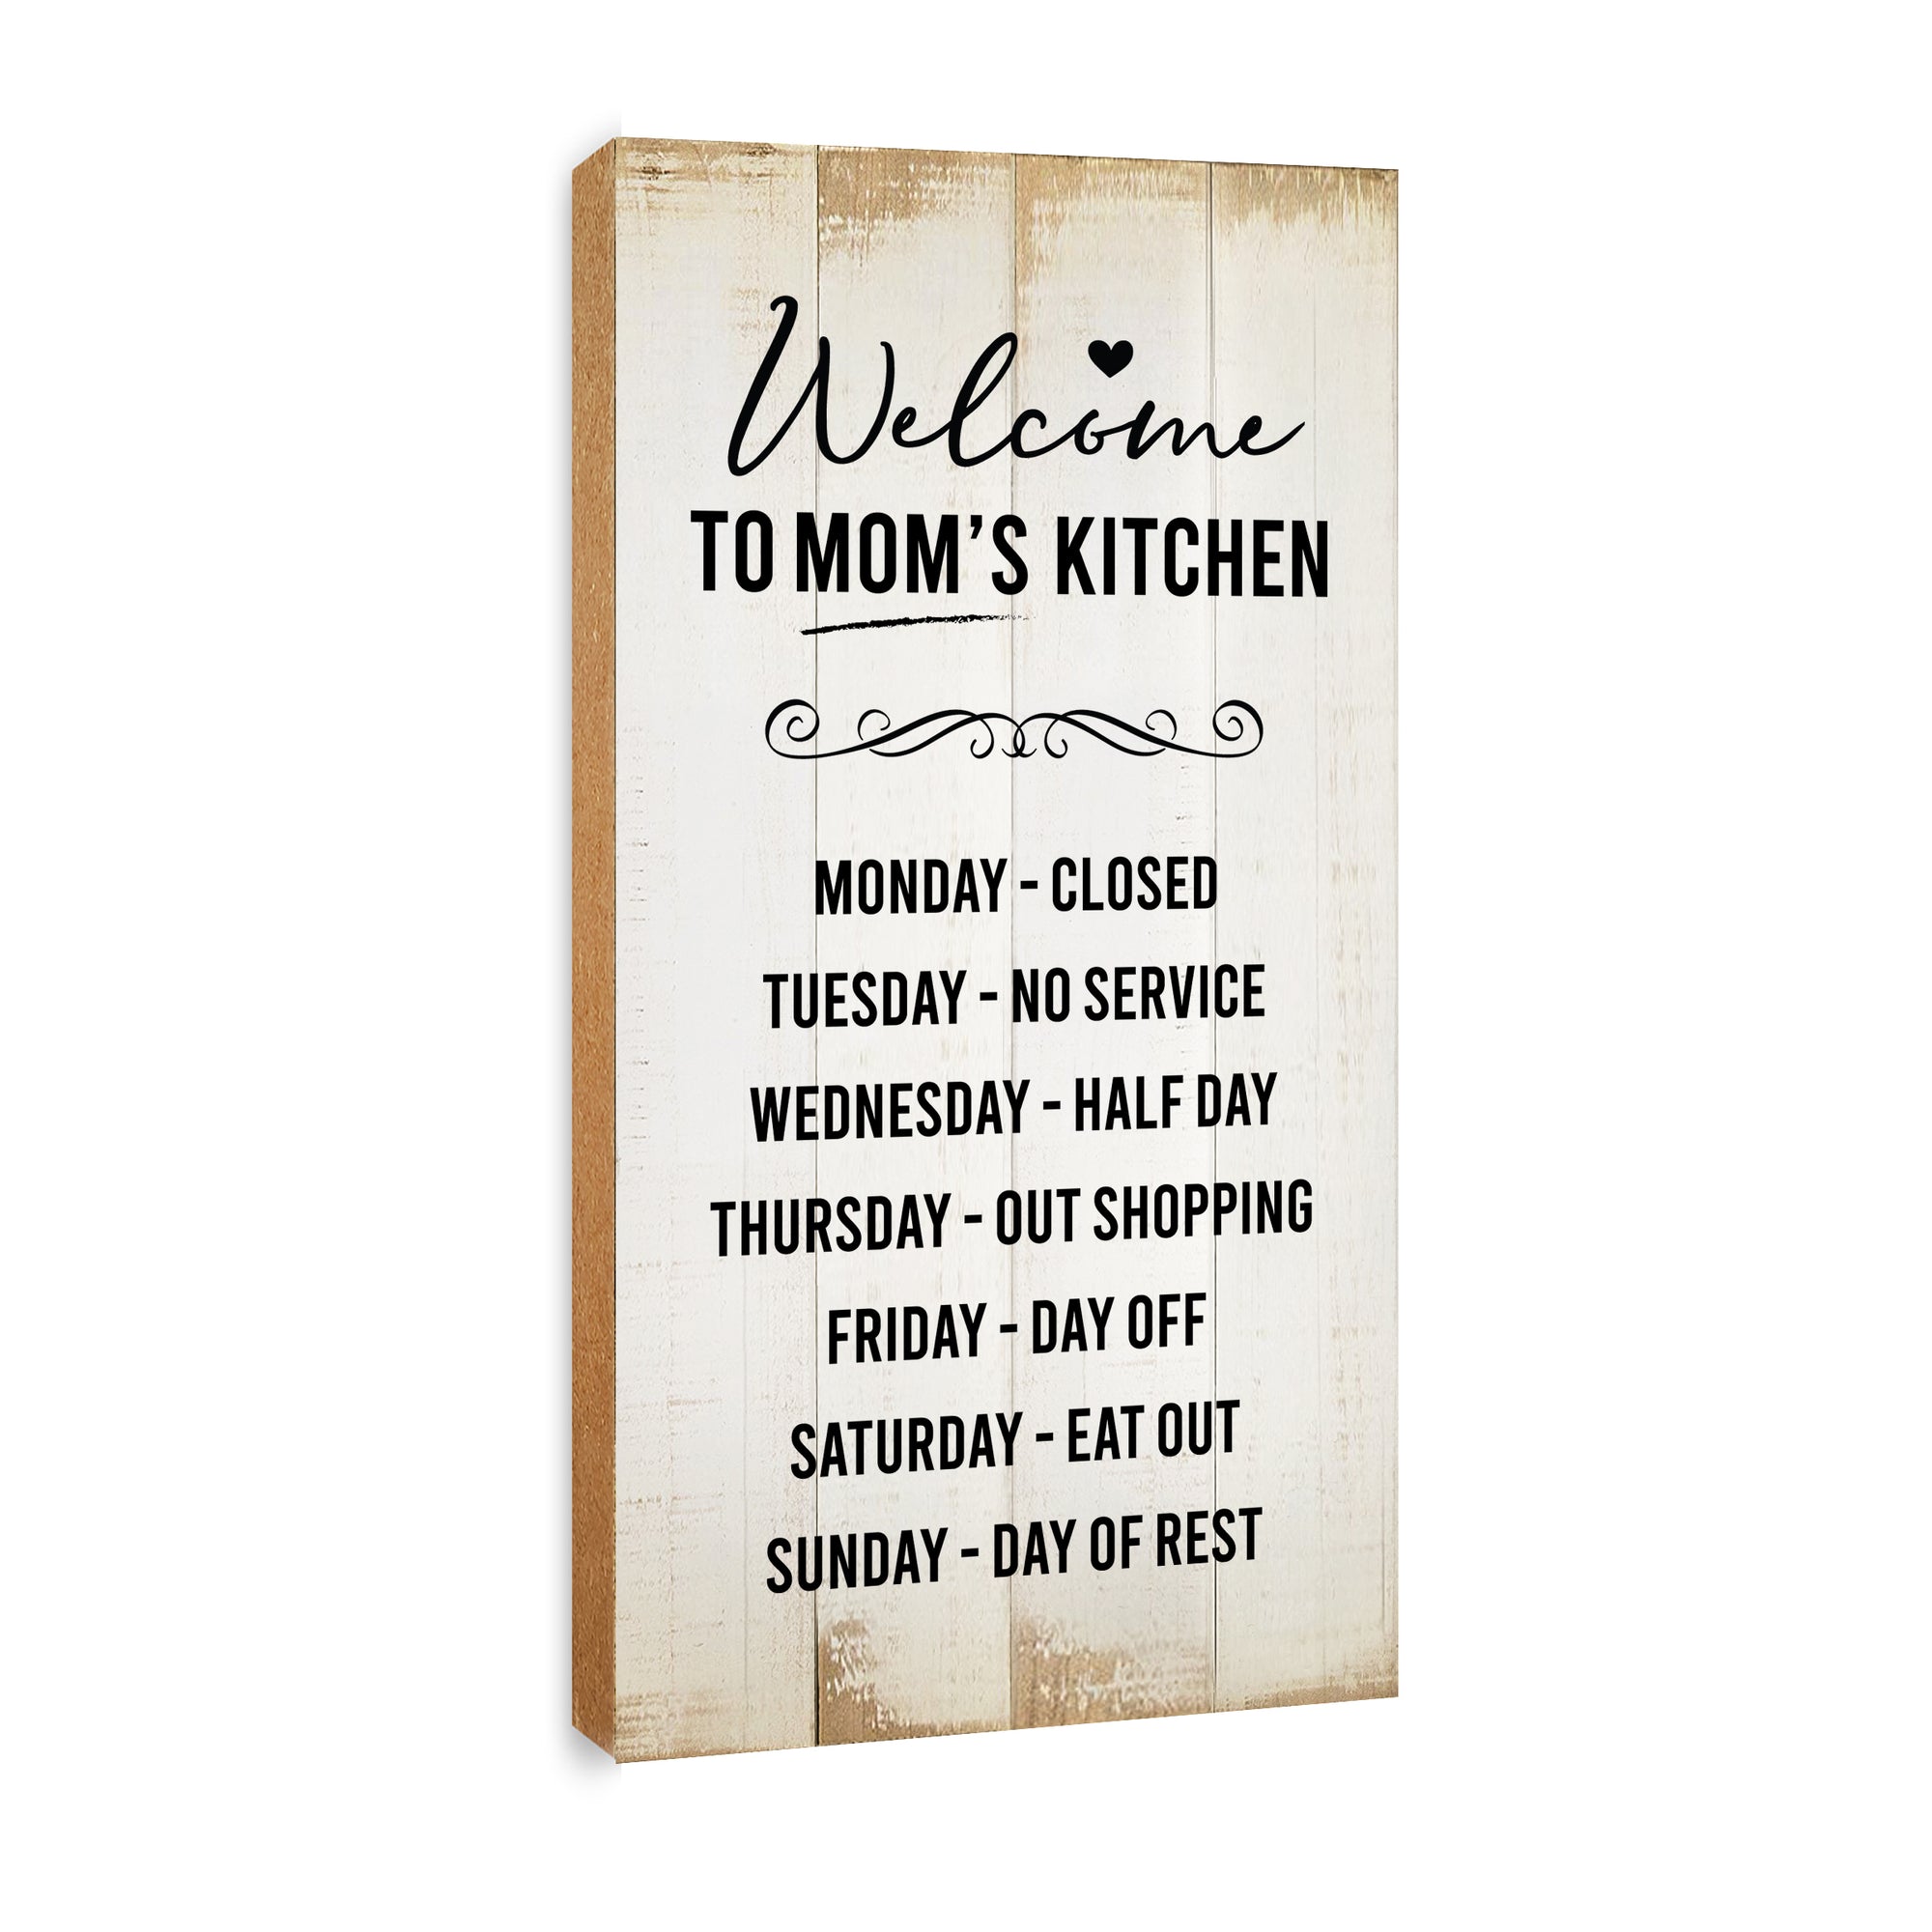 Vintage-inspired kitchen wall plaque for stylish home decor.